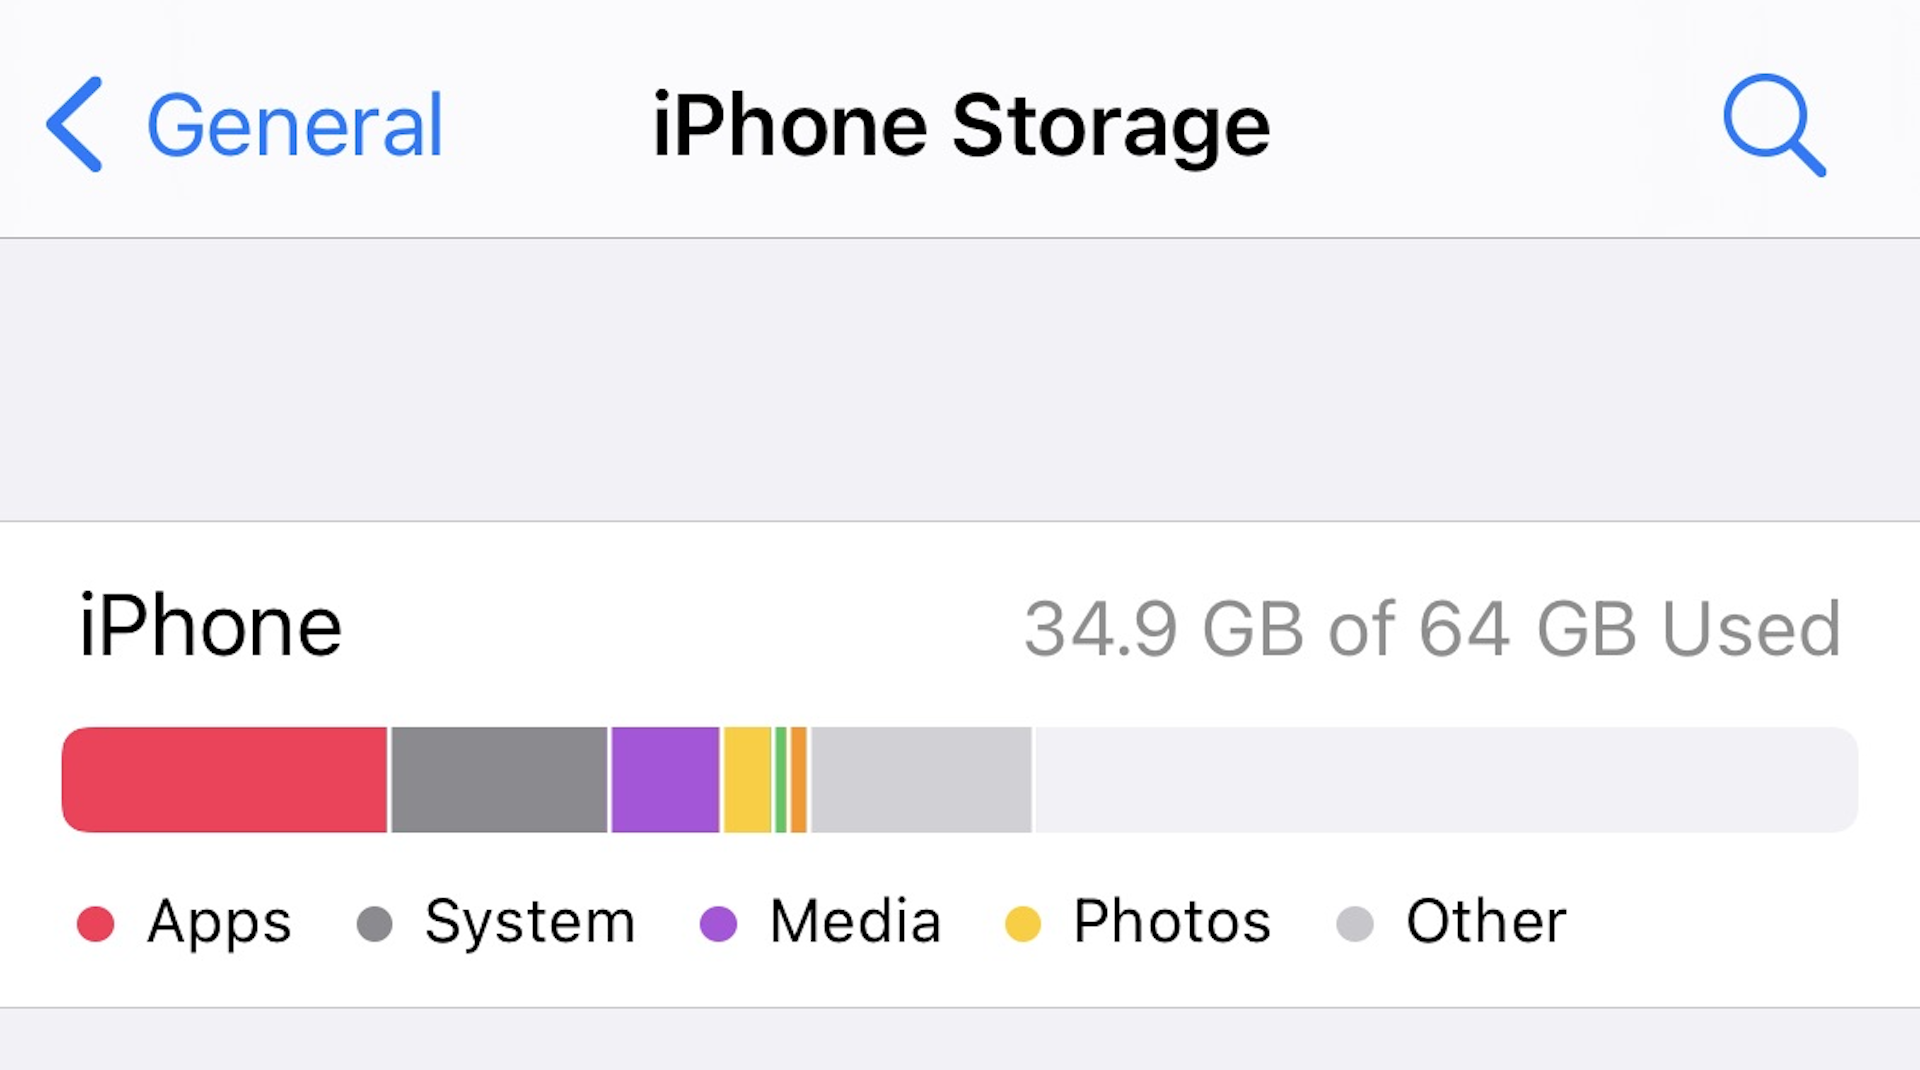 How do I clear the 'Other' files taking up storage space on my iPhone?